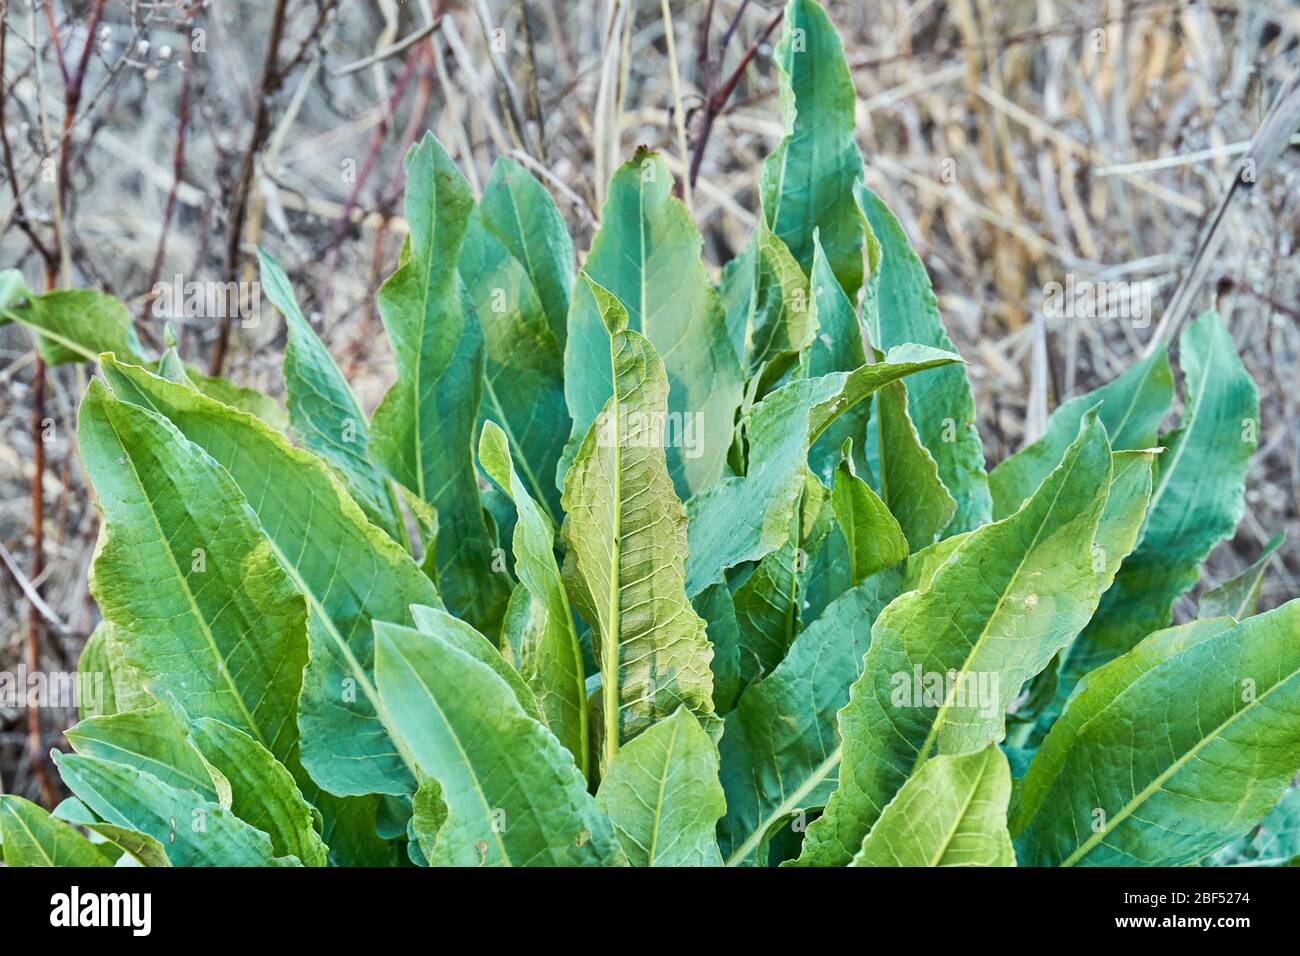 Young Curled Dock (Rumex crispus) plant growning in Texas Stock Photo